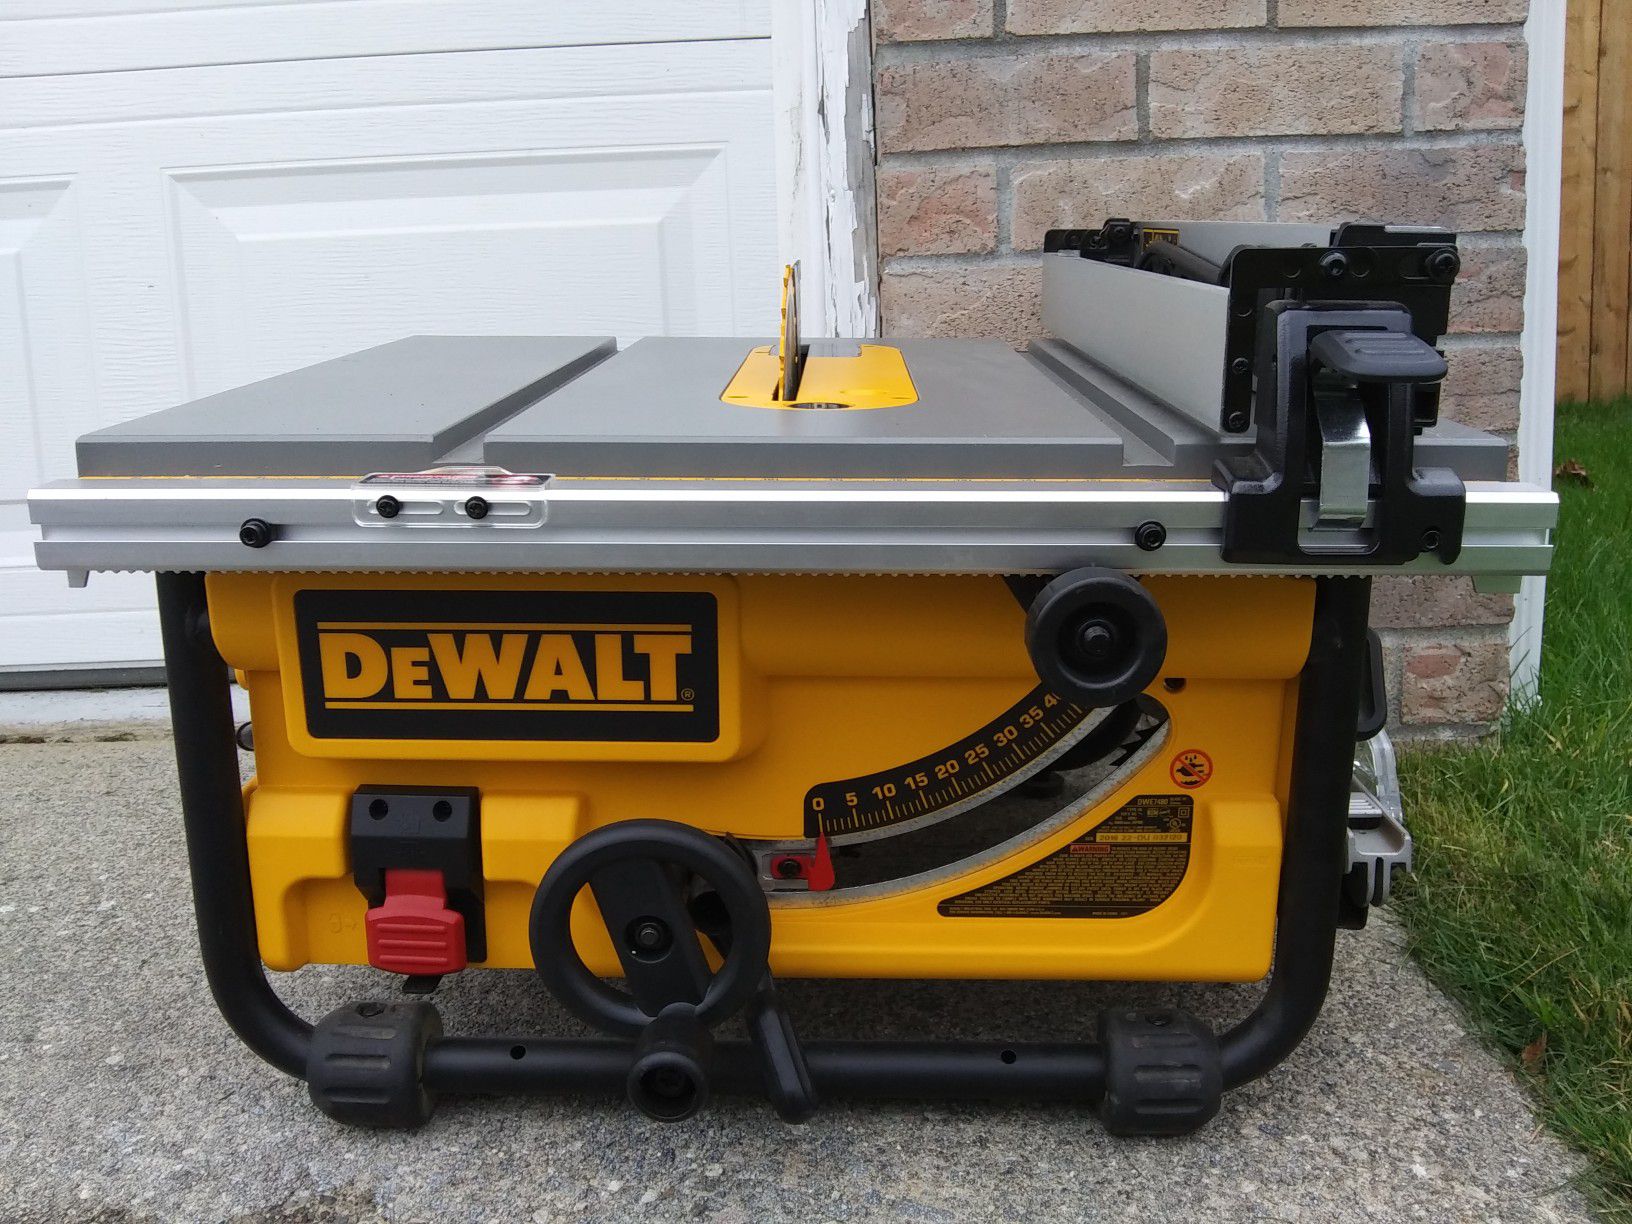 DEWALT DWE7480 15 Amp 10 in. Compact Job Site Table Saw with Site-Pro Modular Guarding System, LIKE NEW